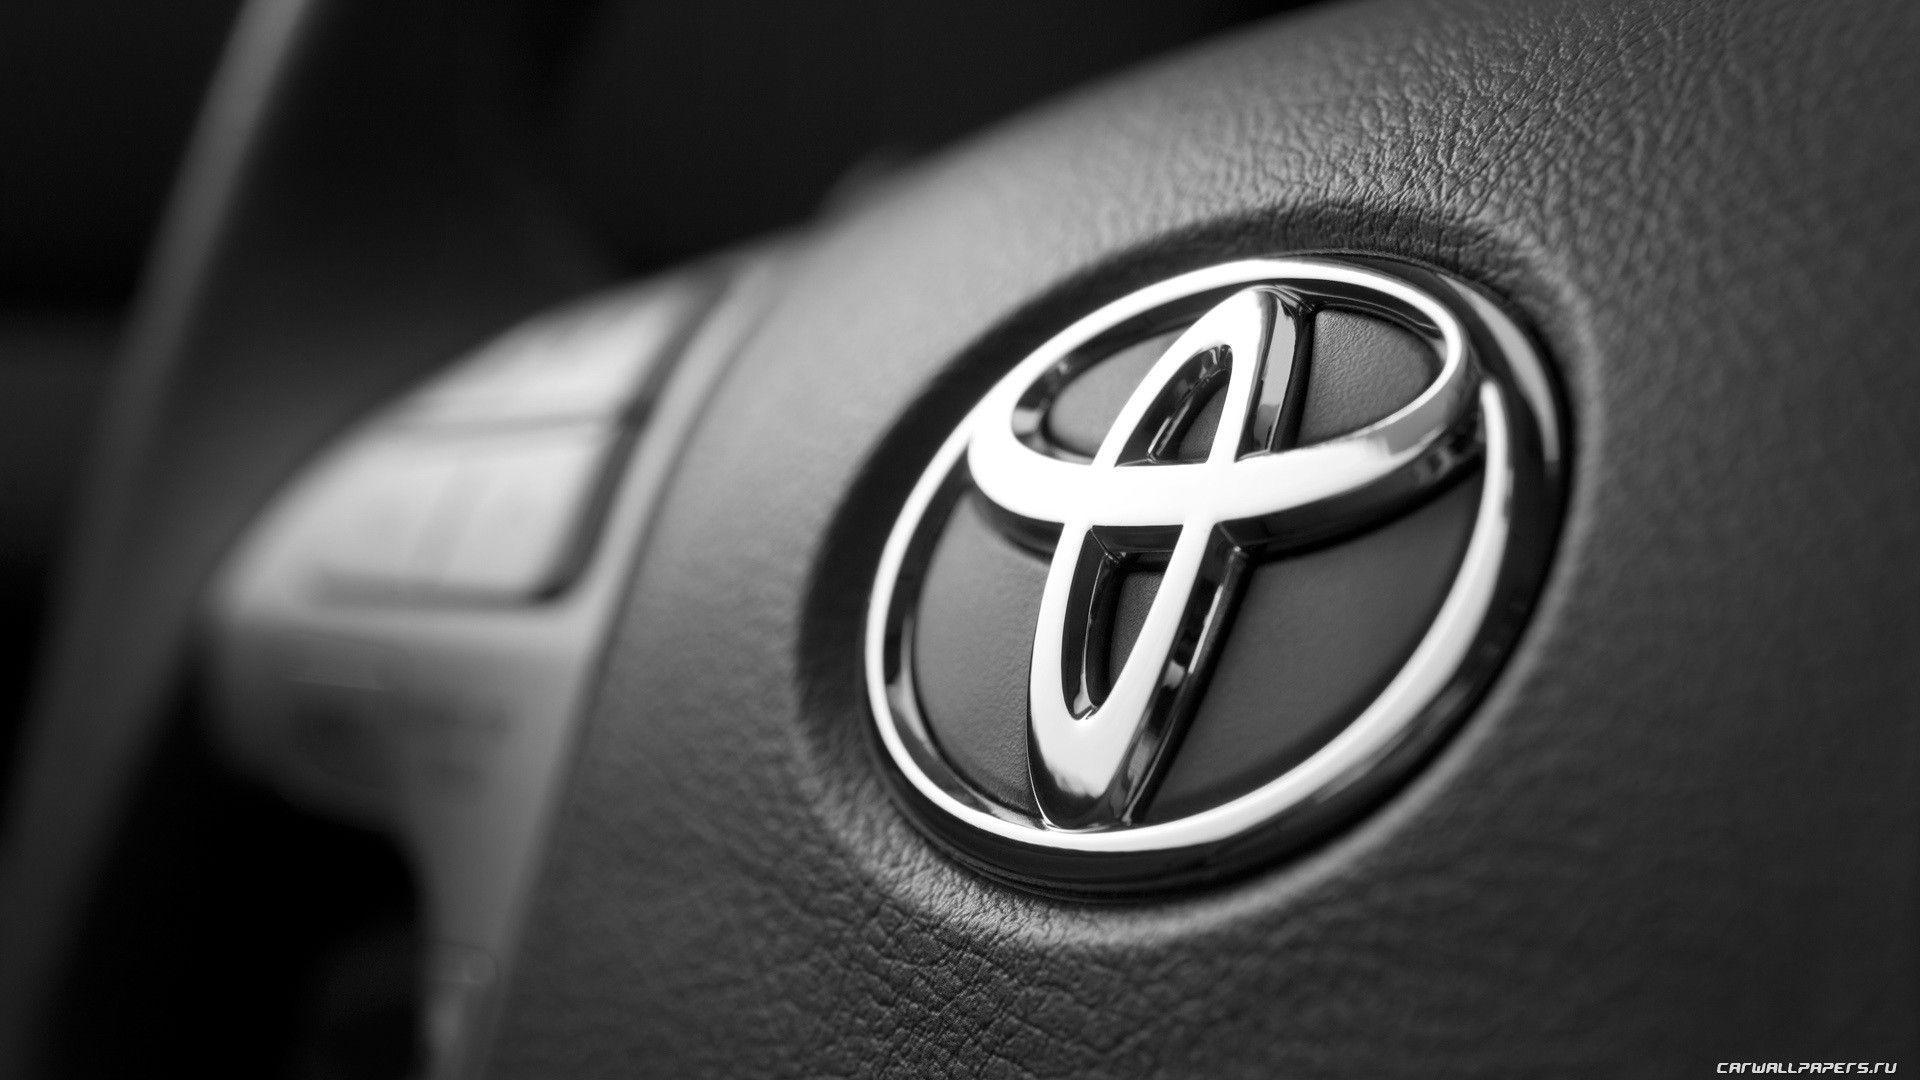 Over 40 HD Stunning Toyota Wallpaper Image For Free Download